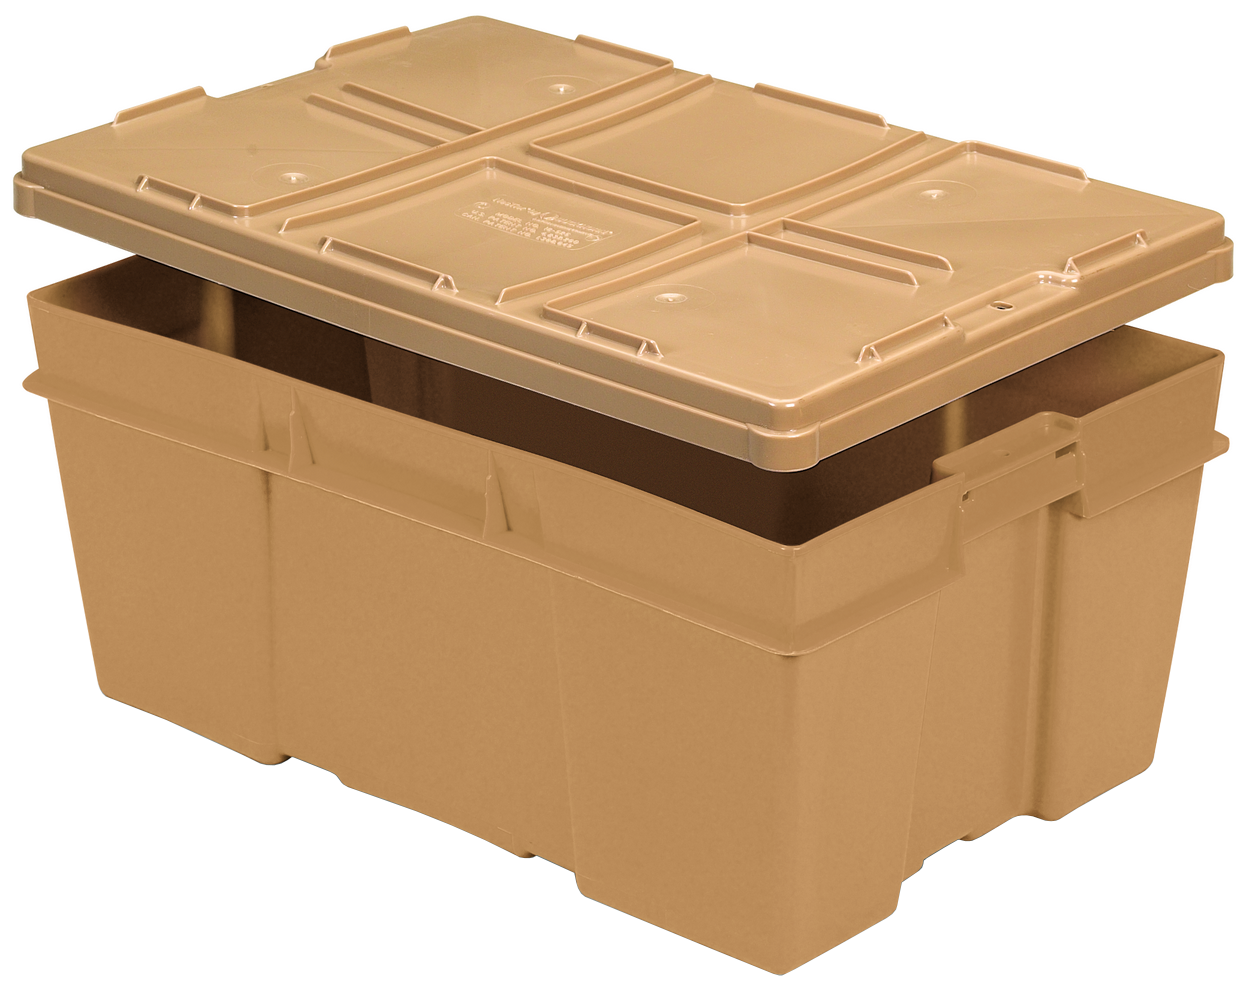 24 x 16 x 11 – Food Handling Container